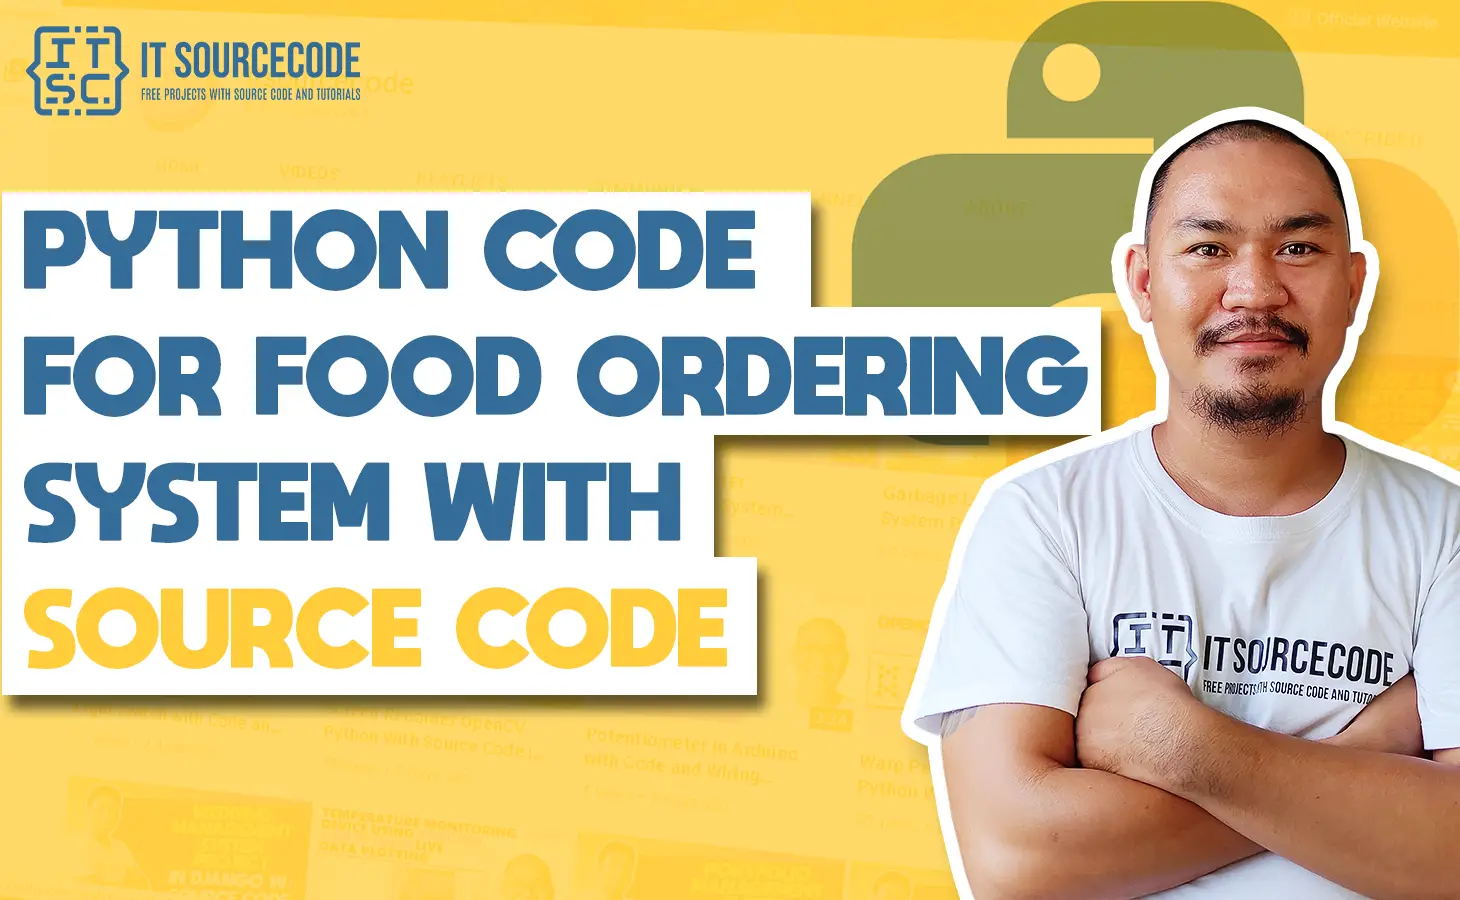 Python Code for Food Ordering System with Source Code